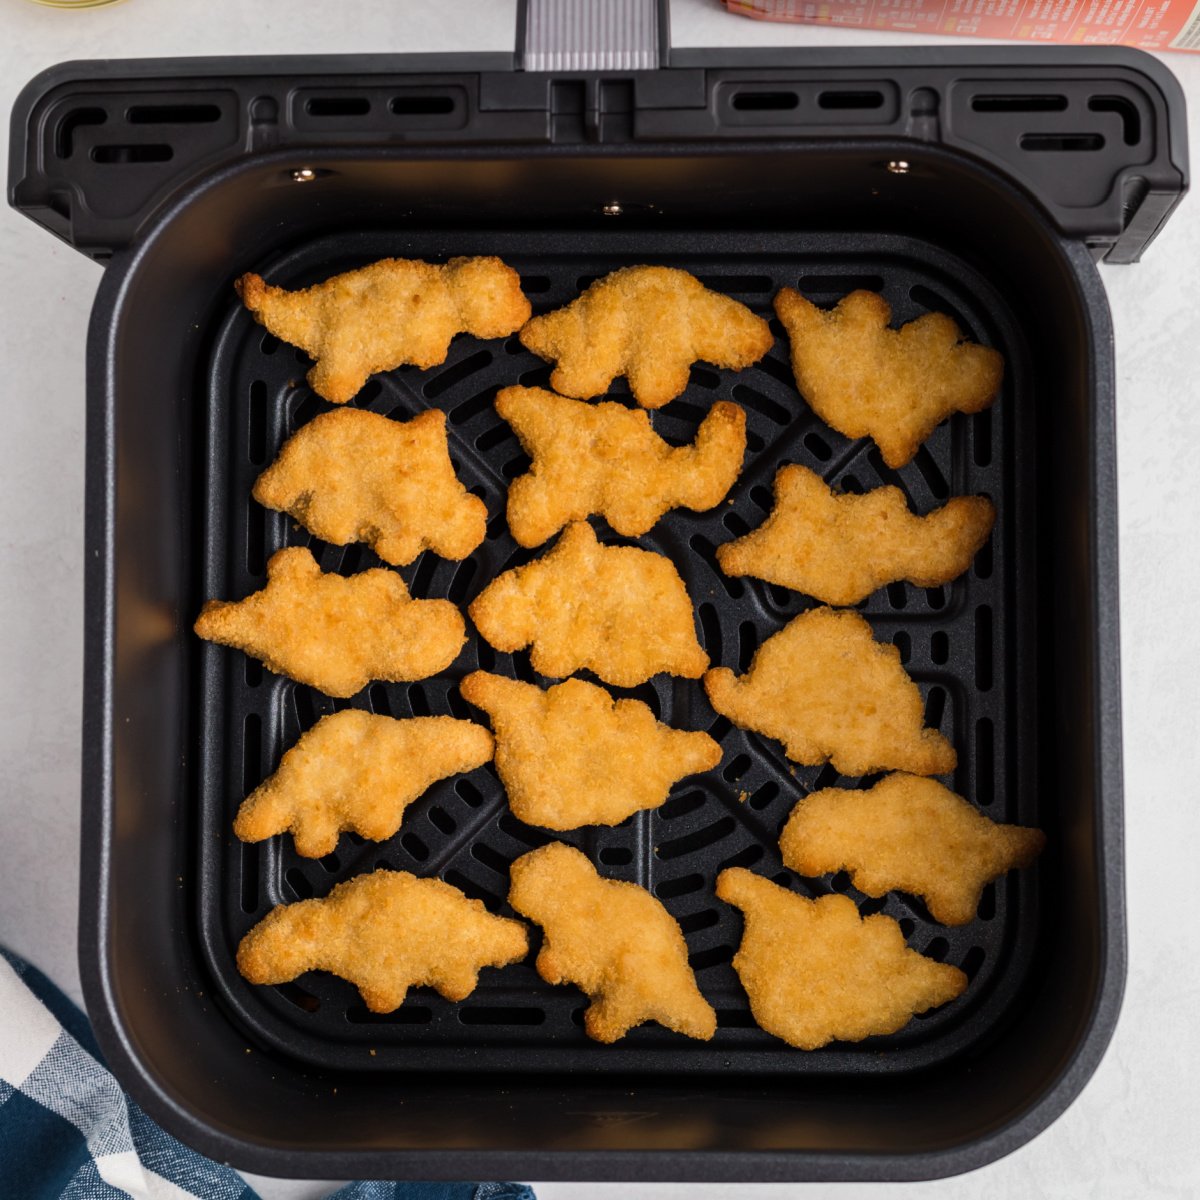 dino nuggets in air fryer